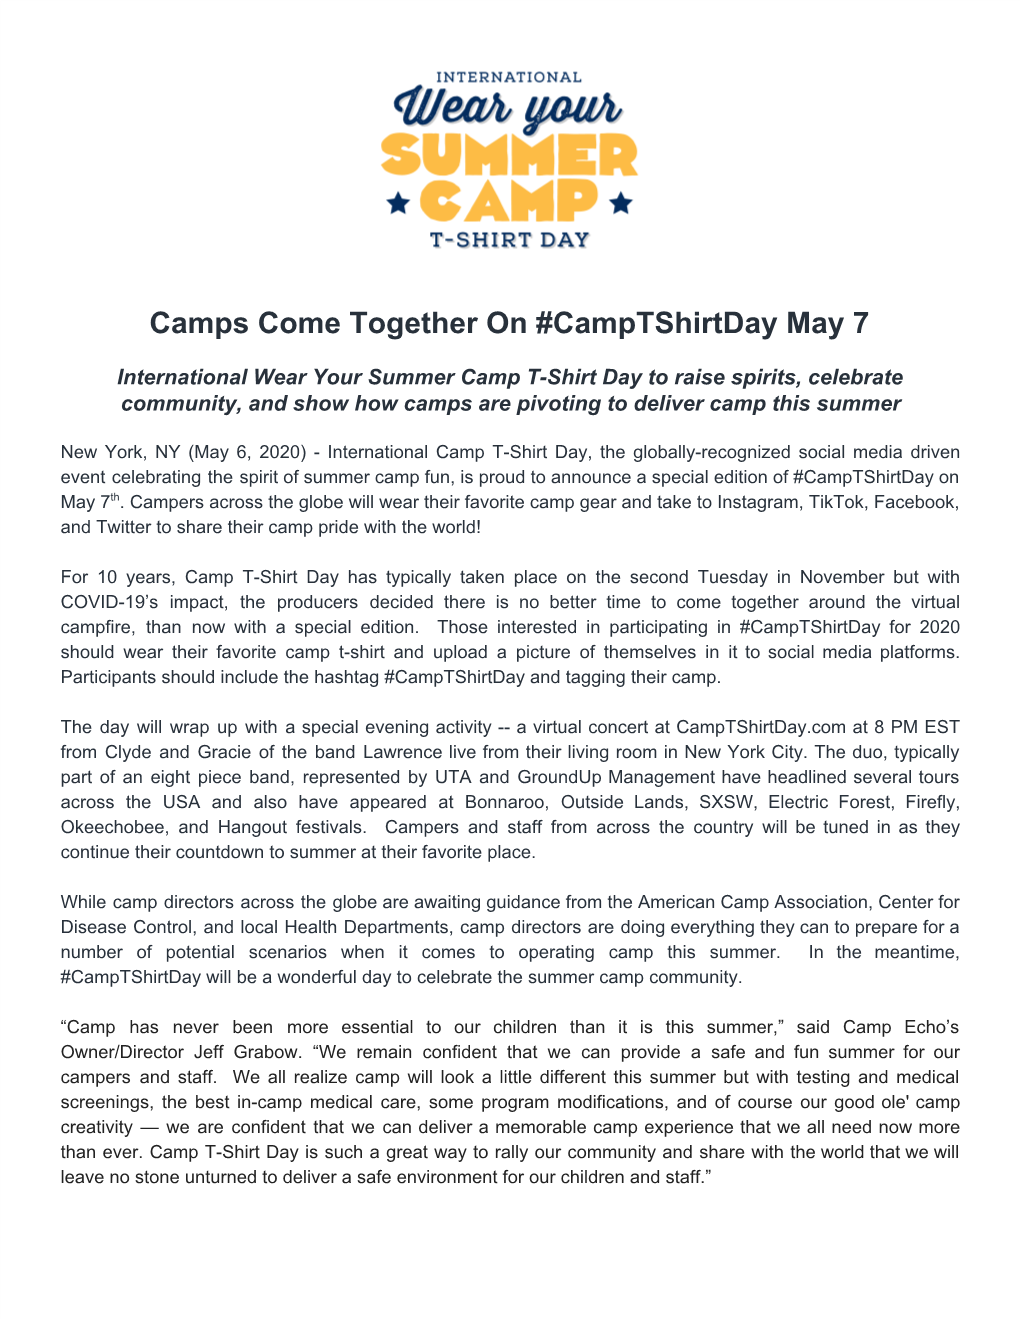 Camps Come Together on #Camptshirtday May 7